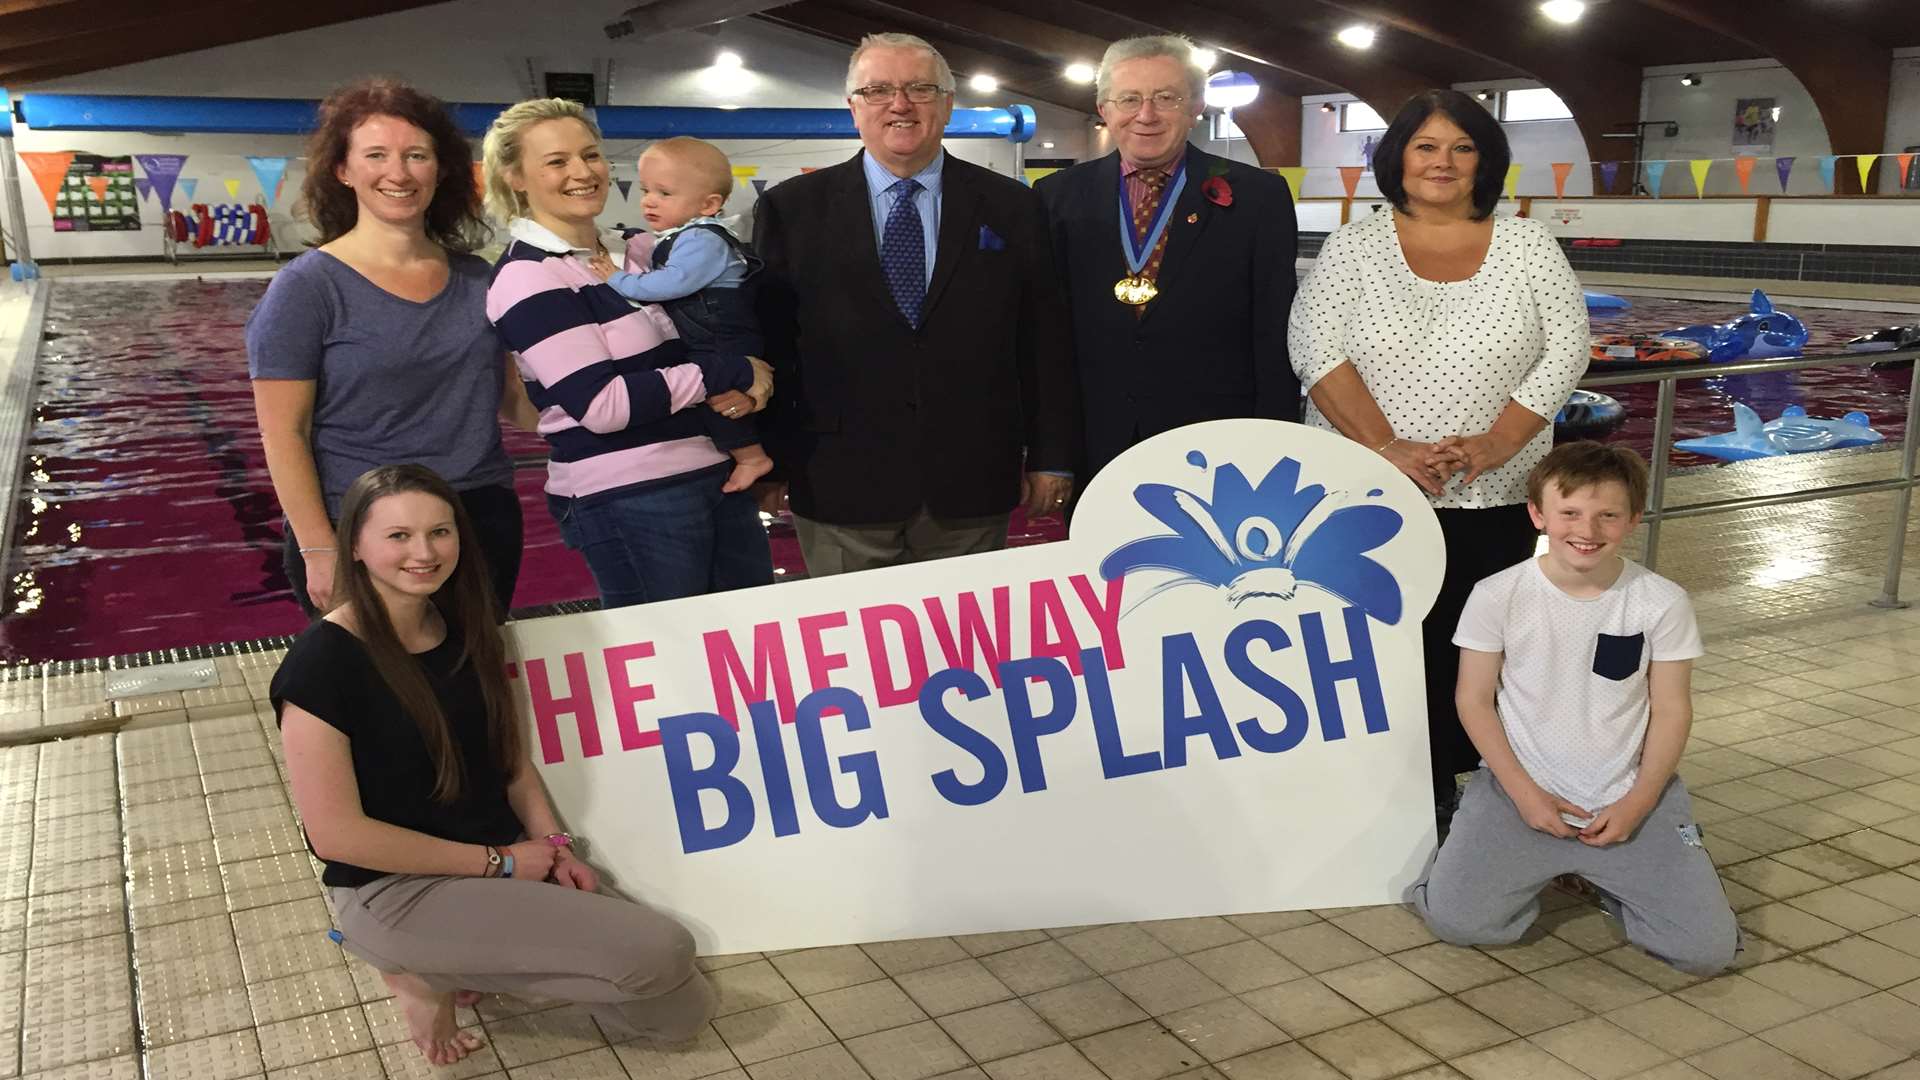 The launch of the Medway Big Splash